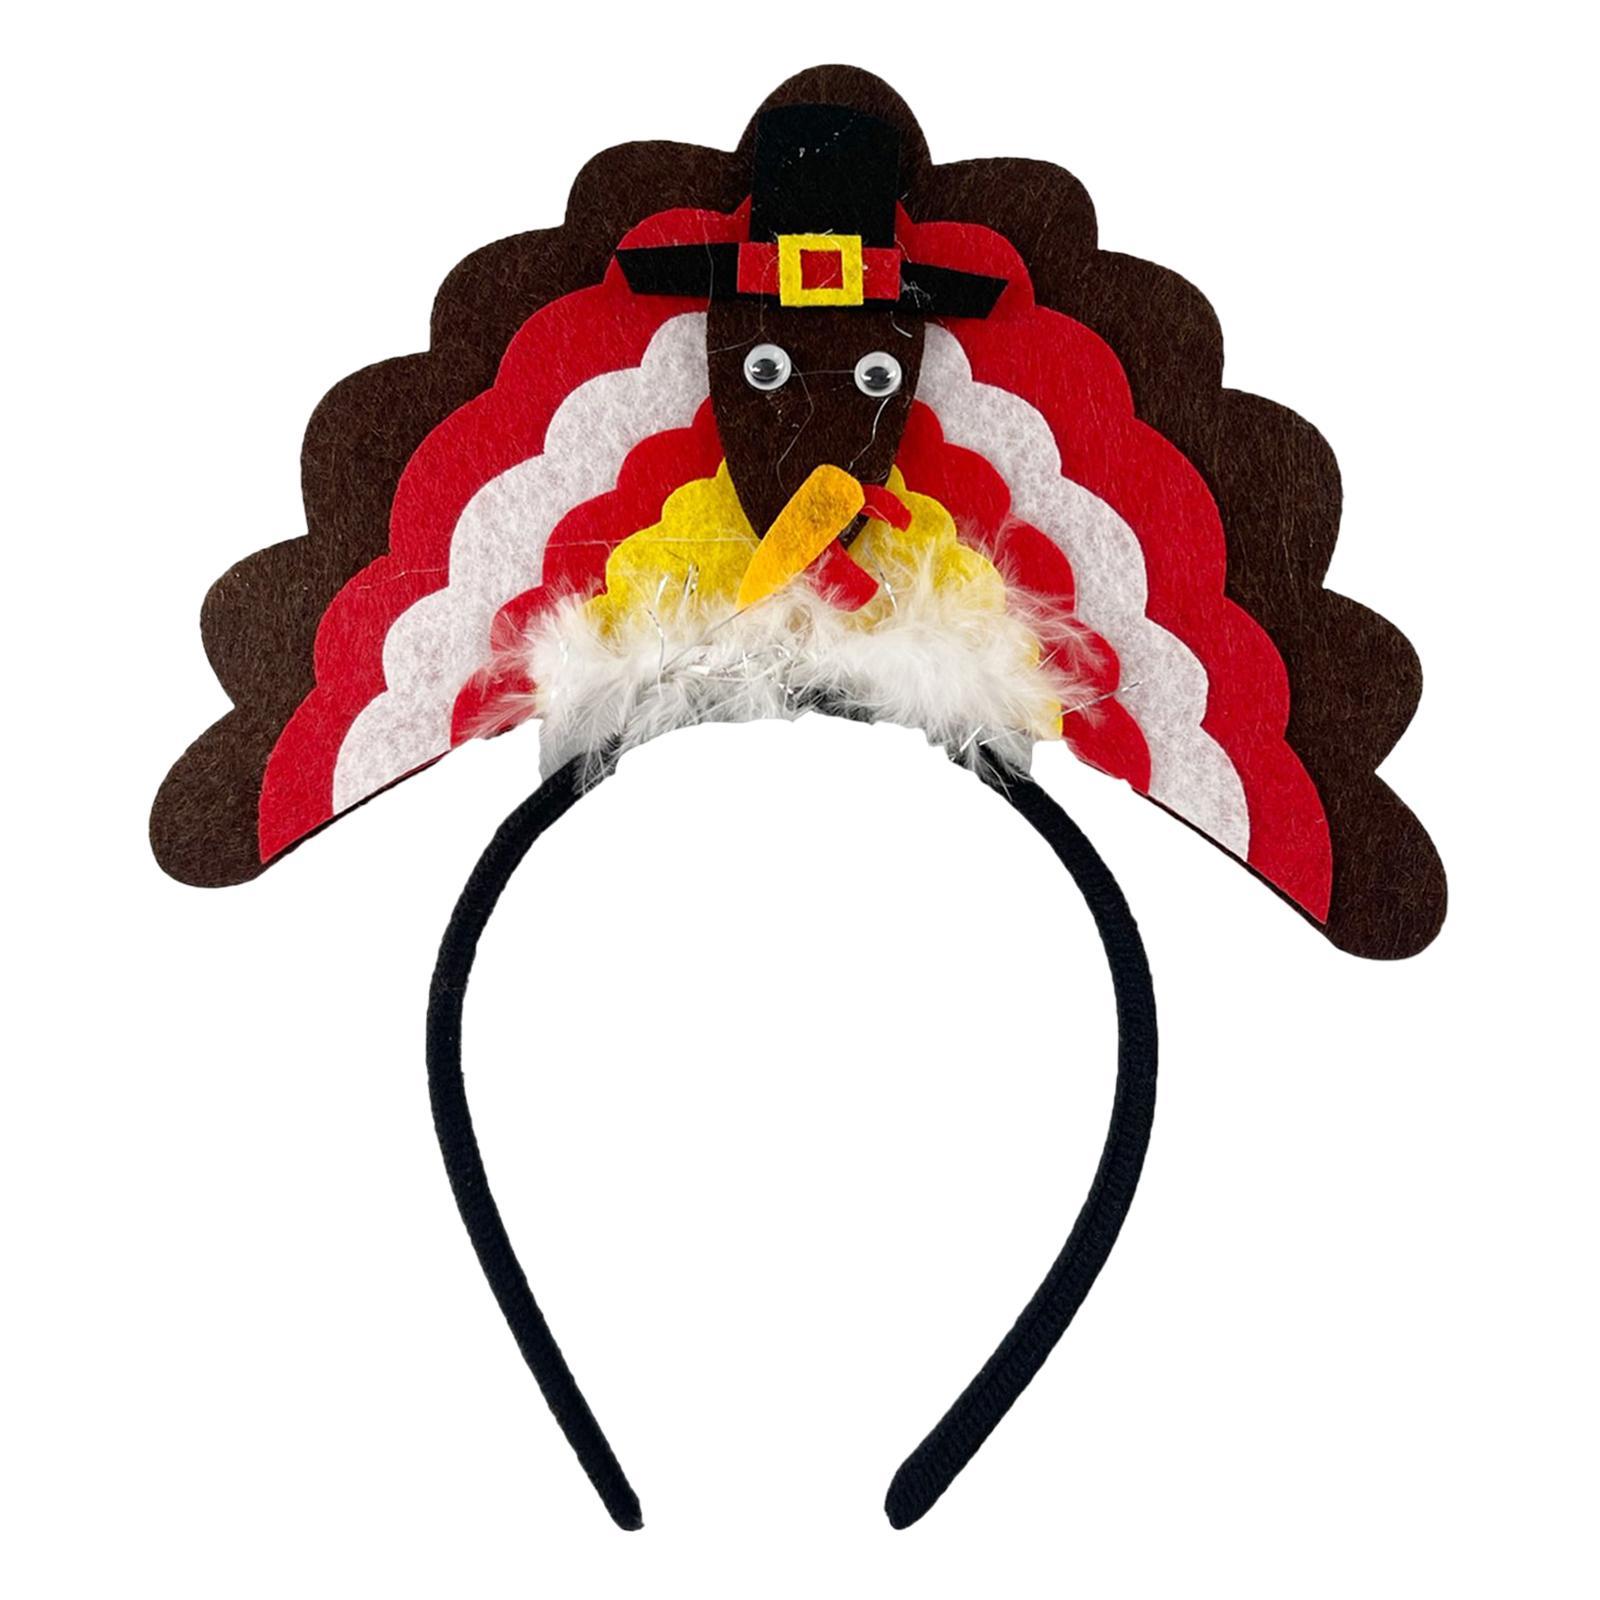 Cute Turkey Headband, Accessories, for Thanksgiving Costume Party Halloween Cosplay